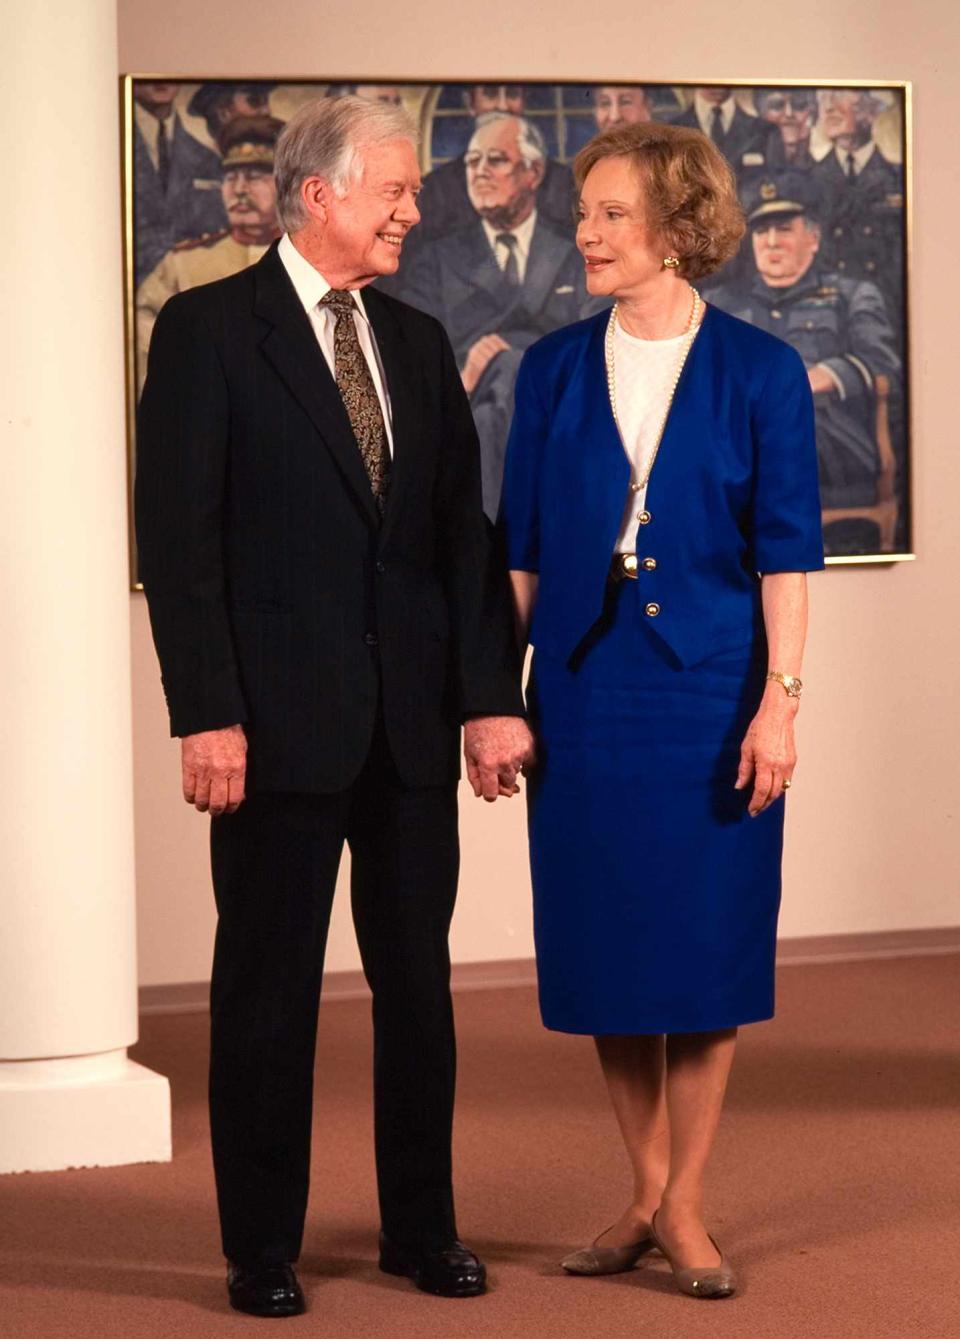 Former US President Jimmy Carter and former First Lady Rosalynn Carter attend an unspecified event at the Jimmy Carter Presidential Library & Museum, Atlanta, Georgia, 1996